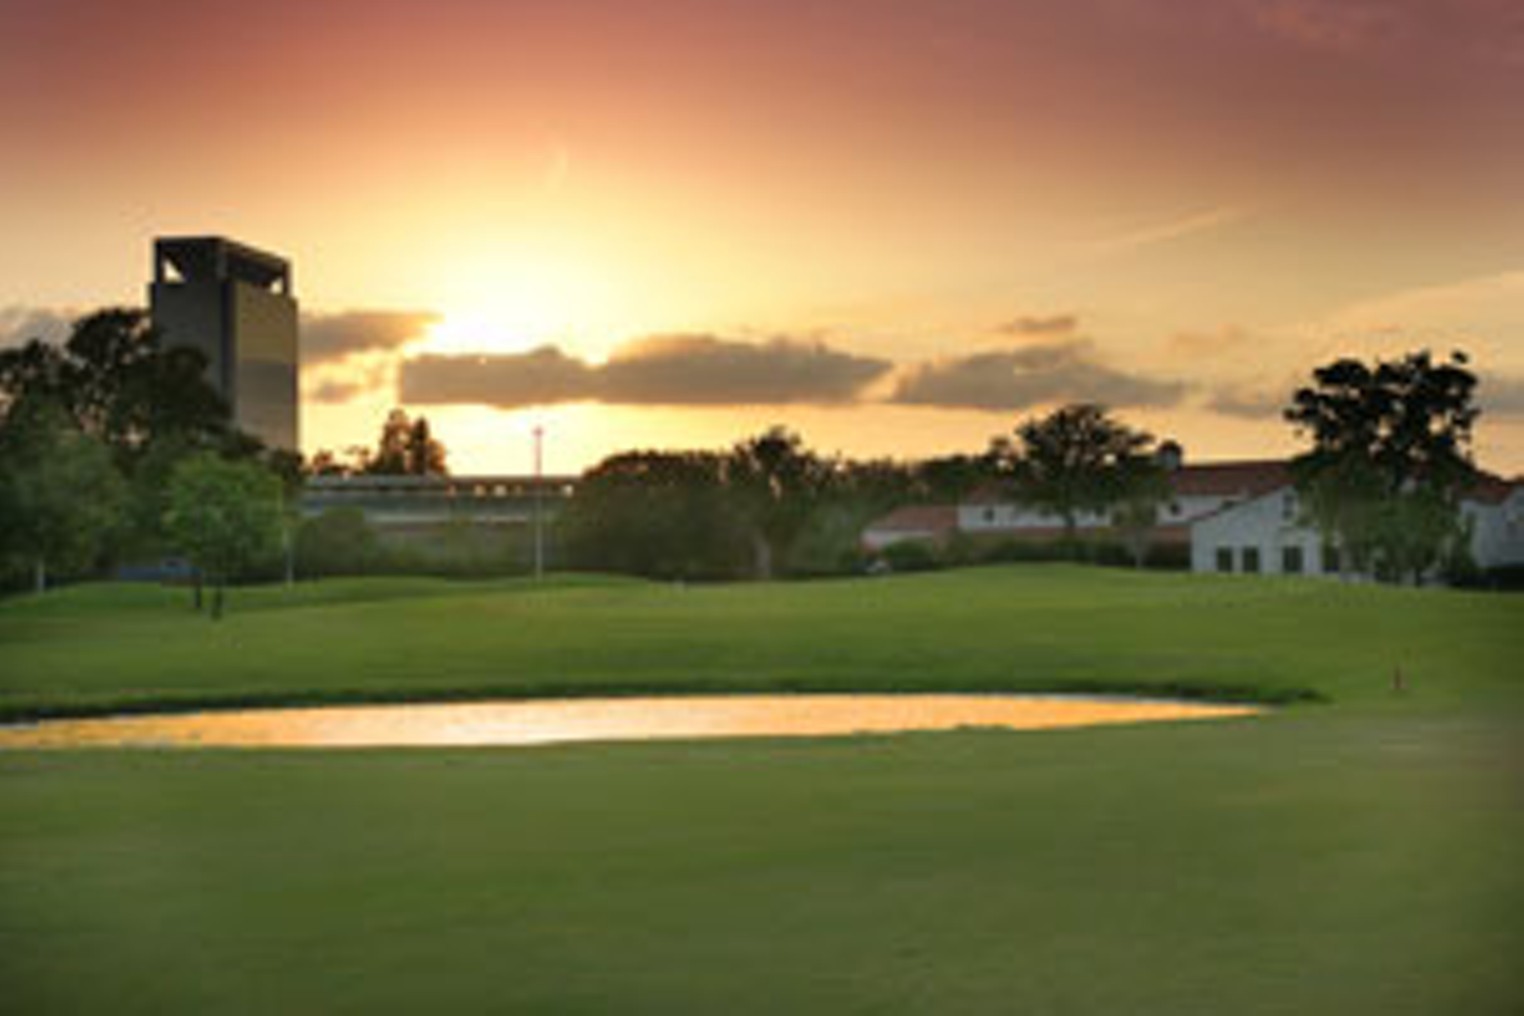 Footpad Mission aflivning Best Golf Course 2010 | Hermann Park Golf Course | Best of Houston® | Best  Restaurants, Bars, Clubs, Music and Stores in Houston | Houston Press